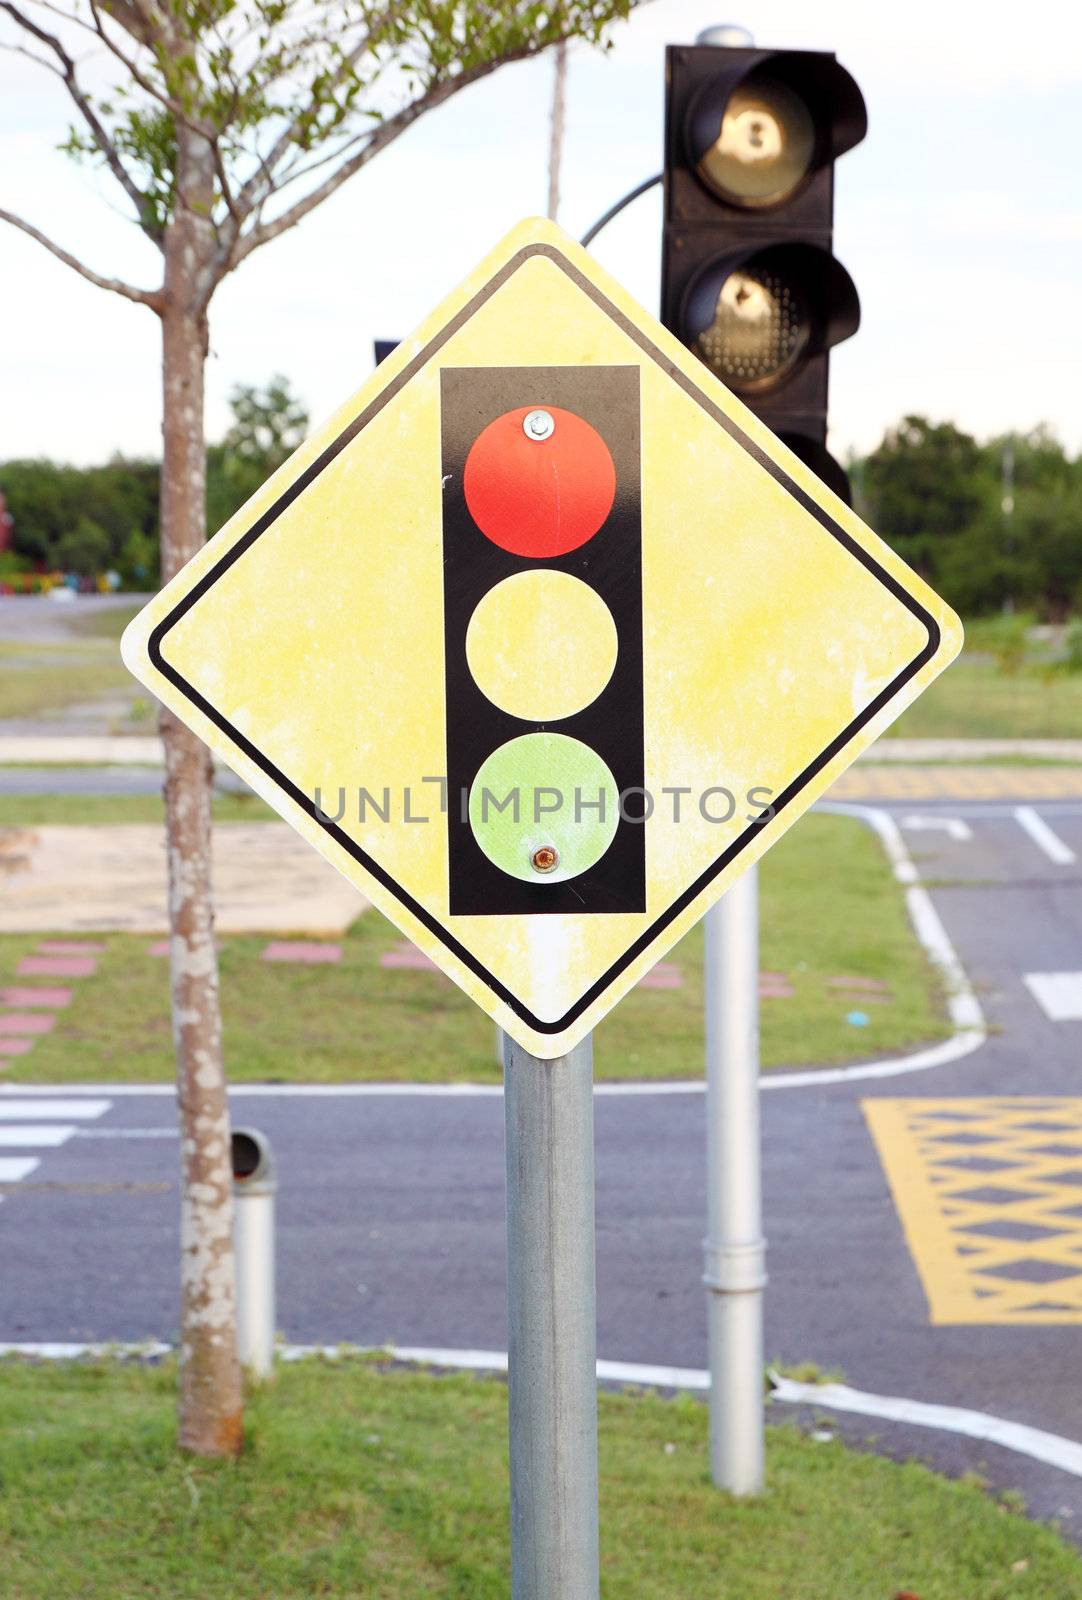 A road sign warning of a traffic light ahead by geargodz